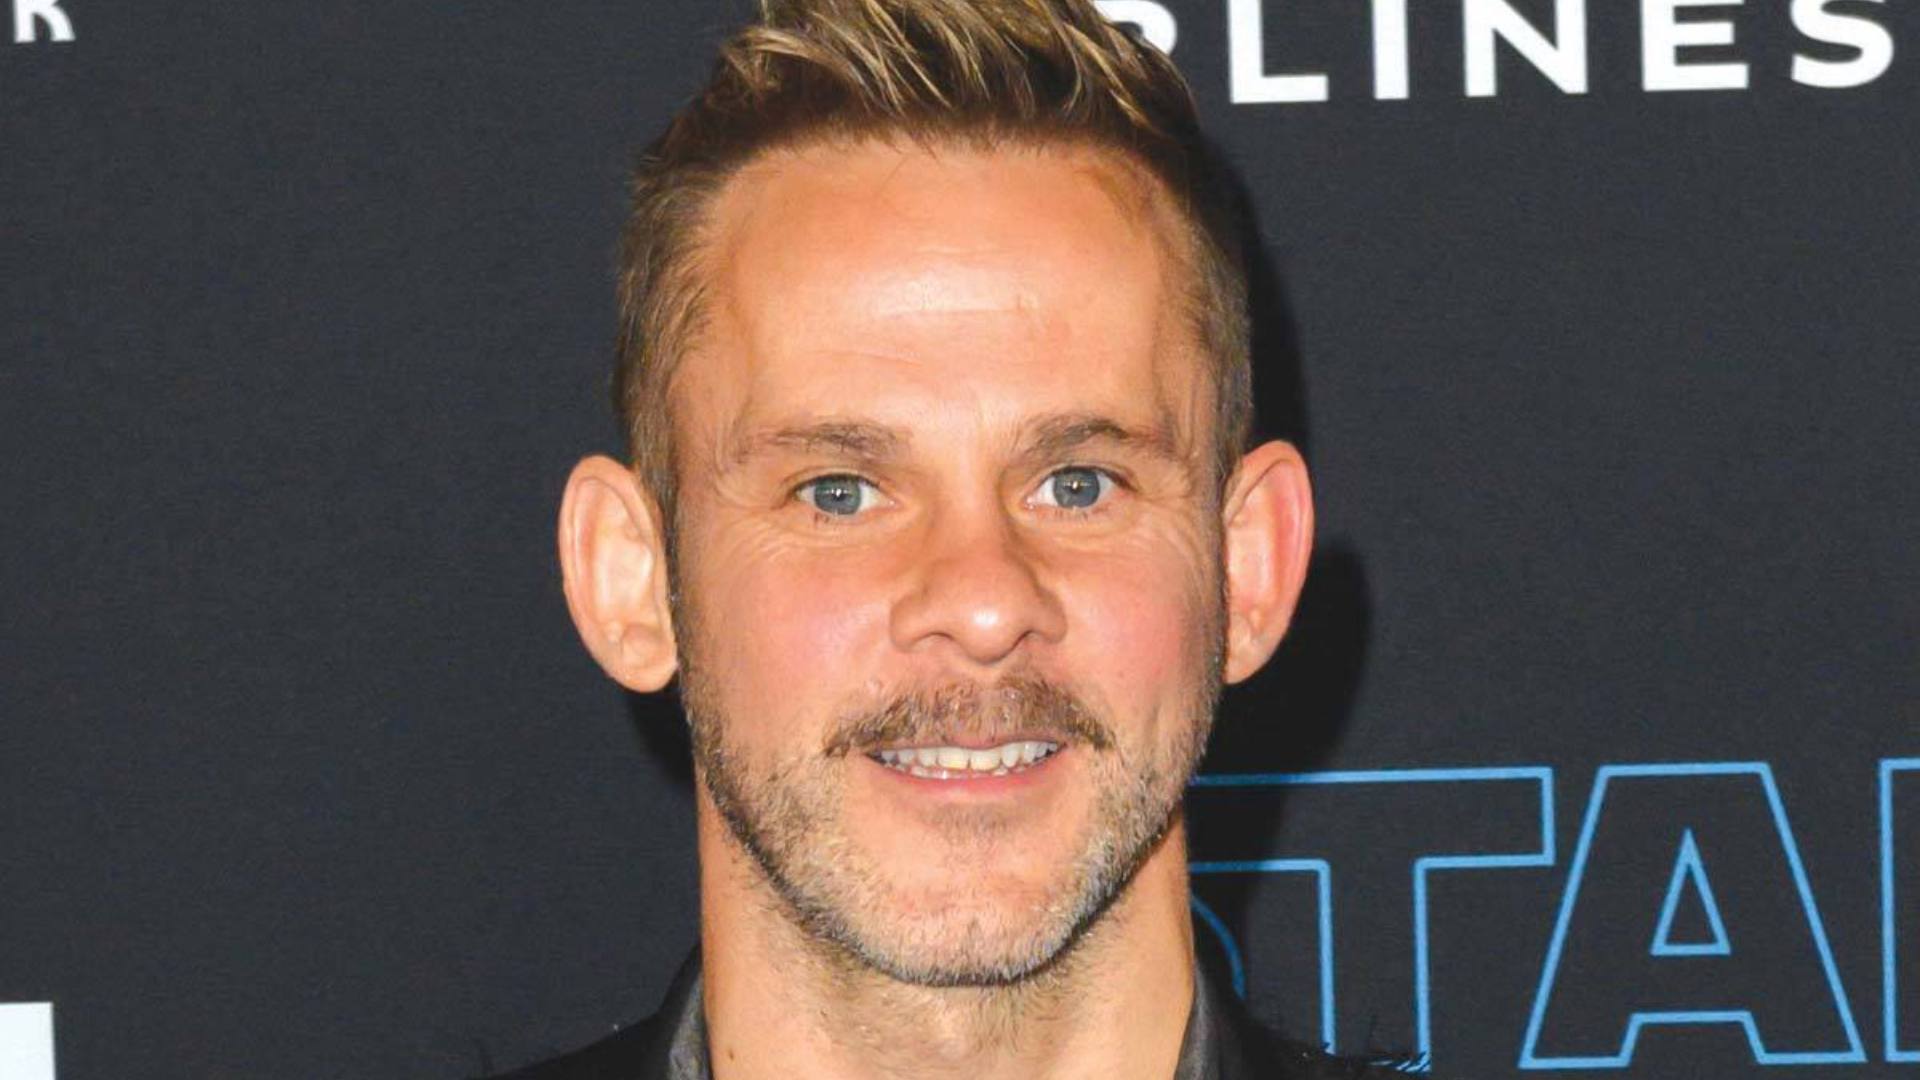 Dominic Monaghan lord of the rings